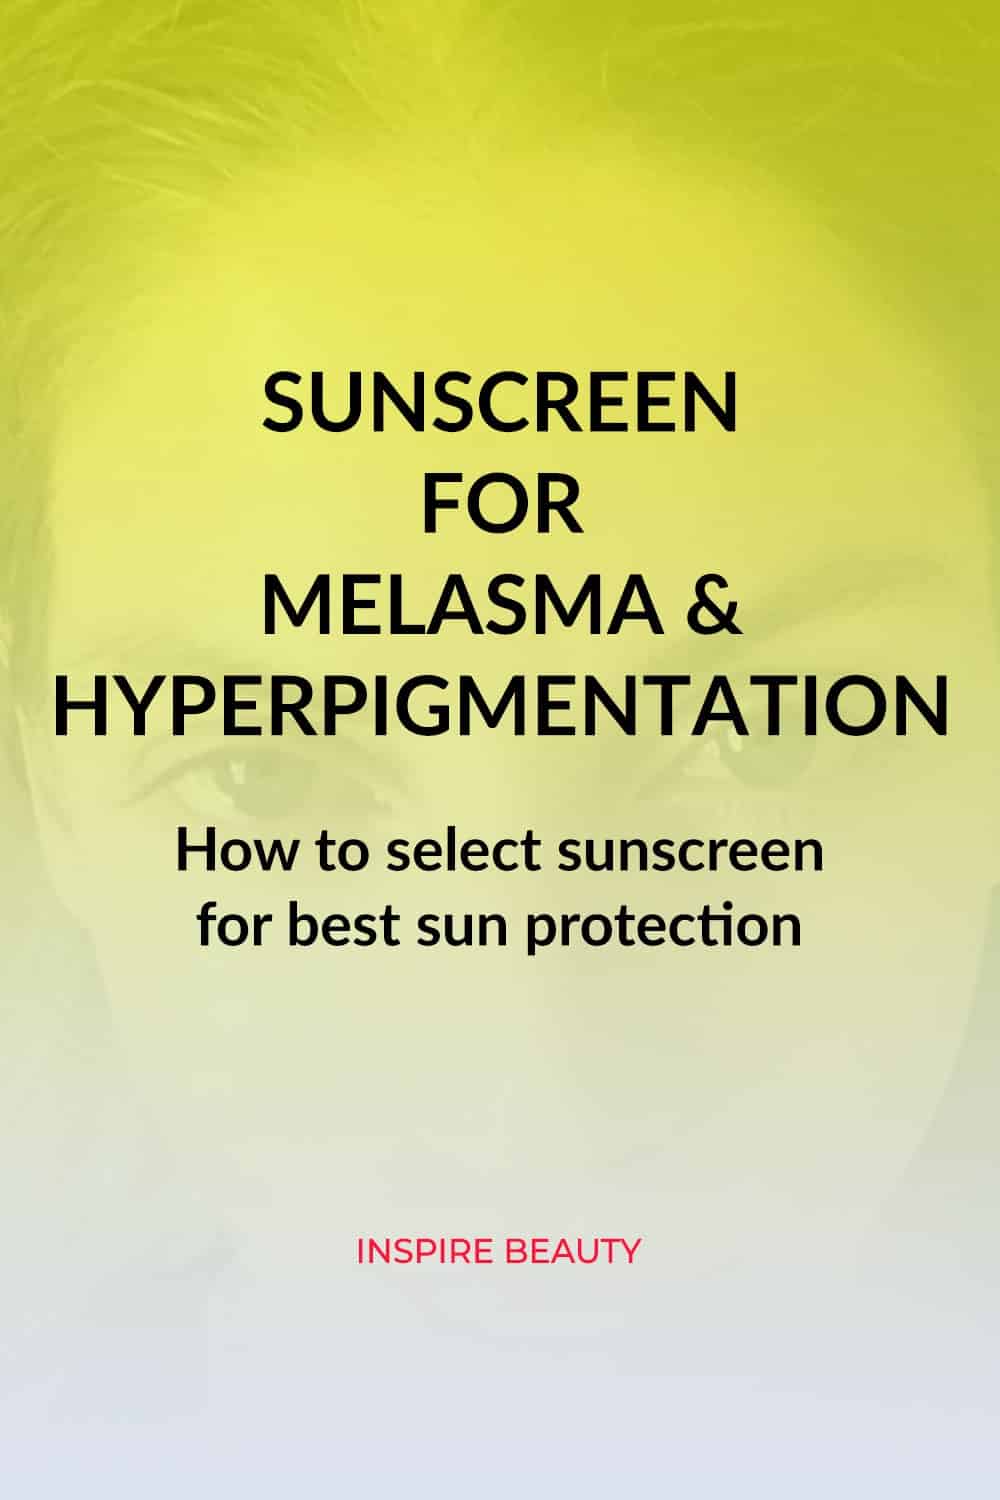 How to choose the right sunscreen for melasma and hyperpigmentation.